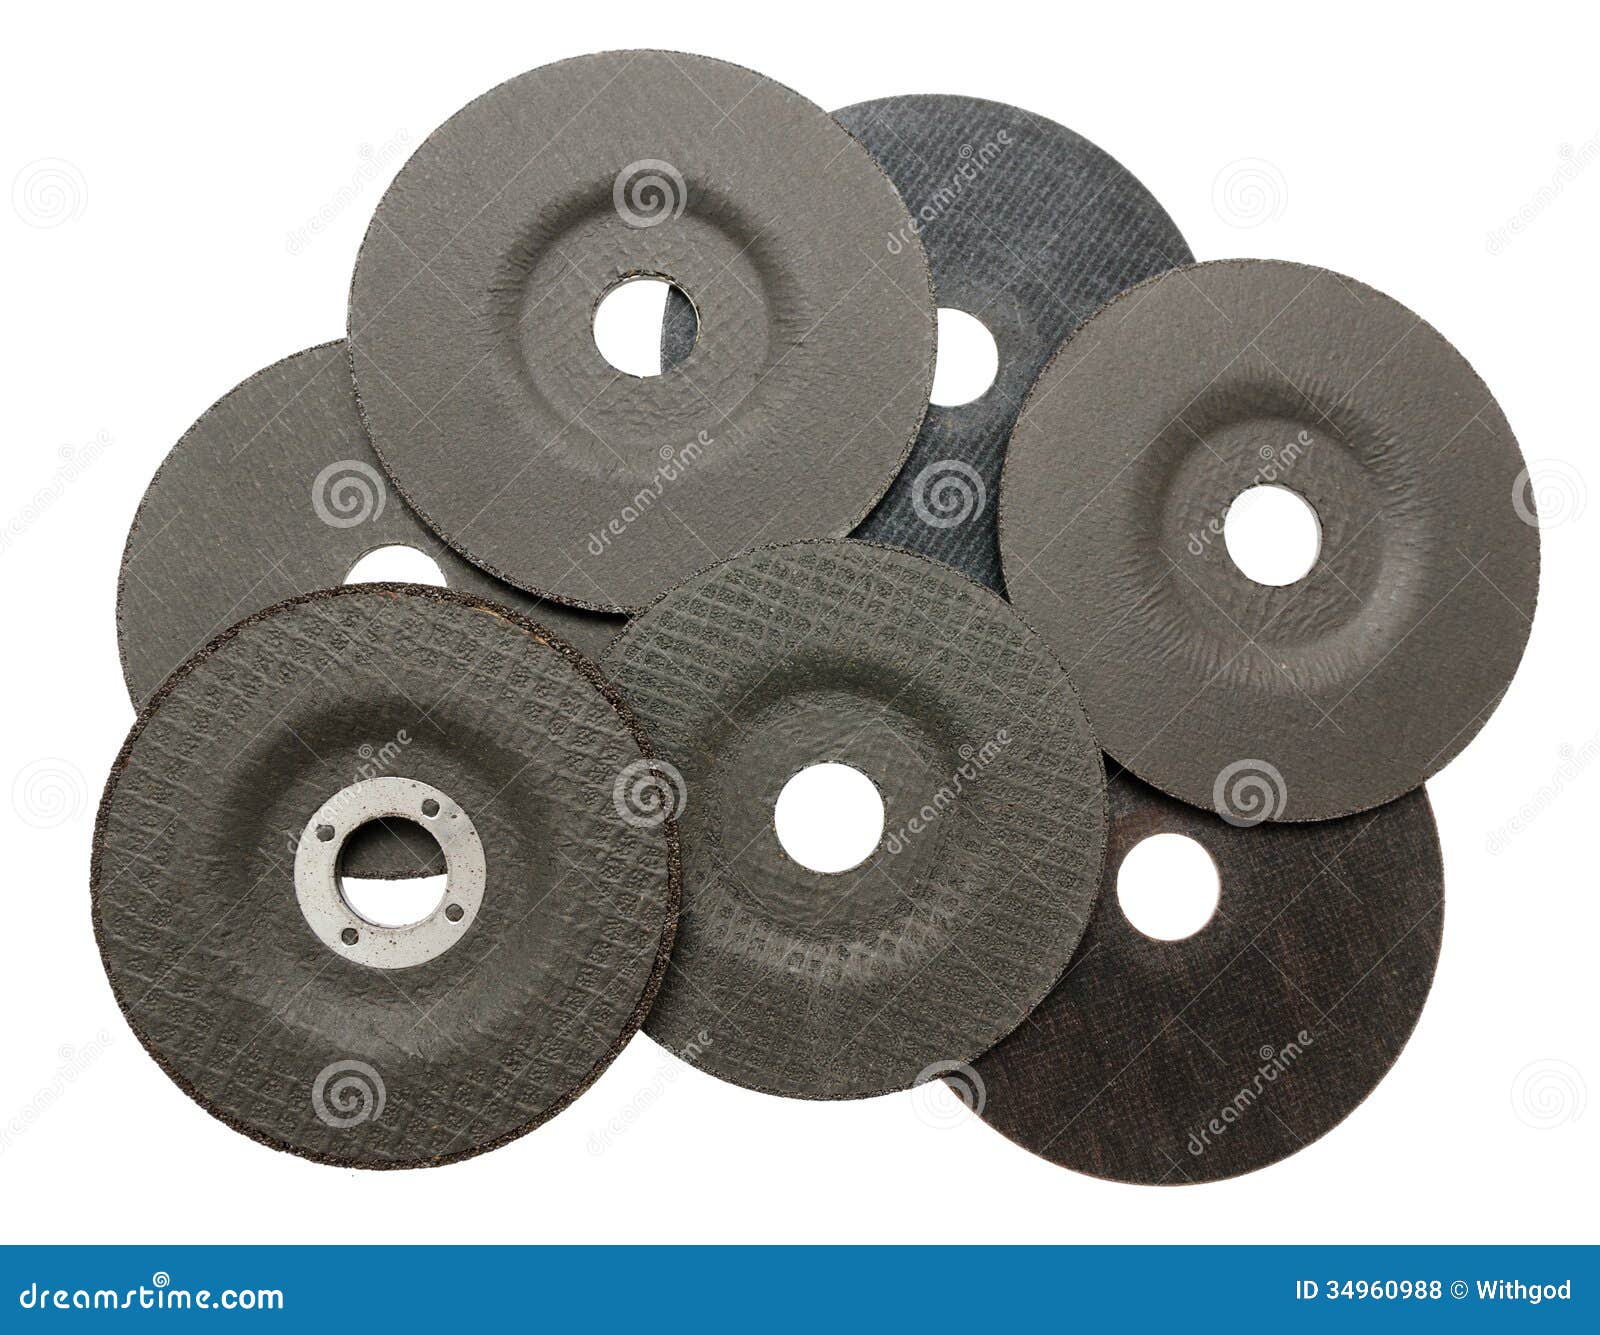 several abrasive discs for metal cutting